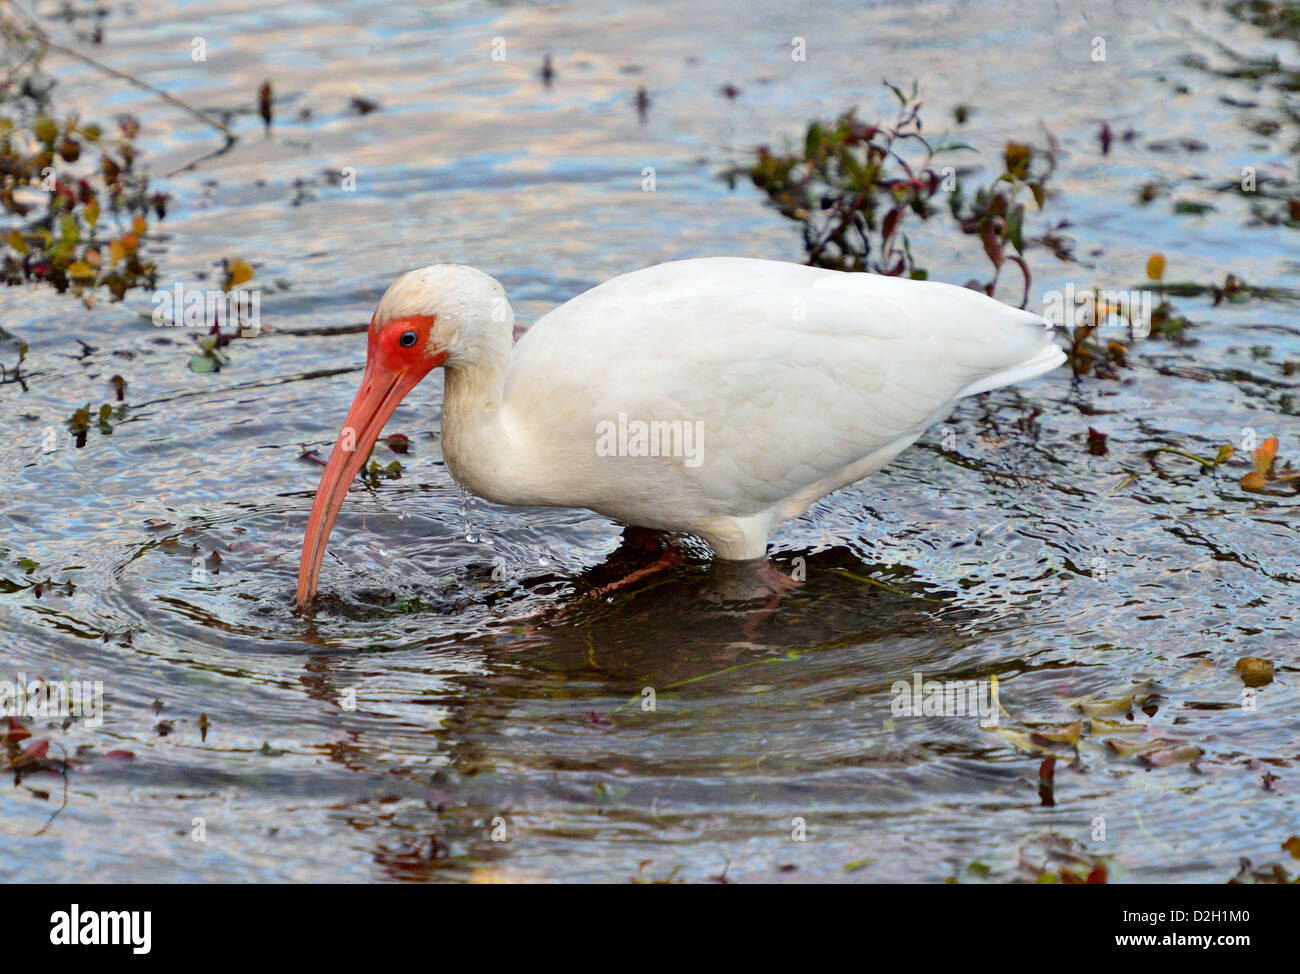 A white ibis wading in swamp. The Everglades National Park, Florida, USA. Stock Photo